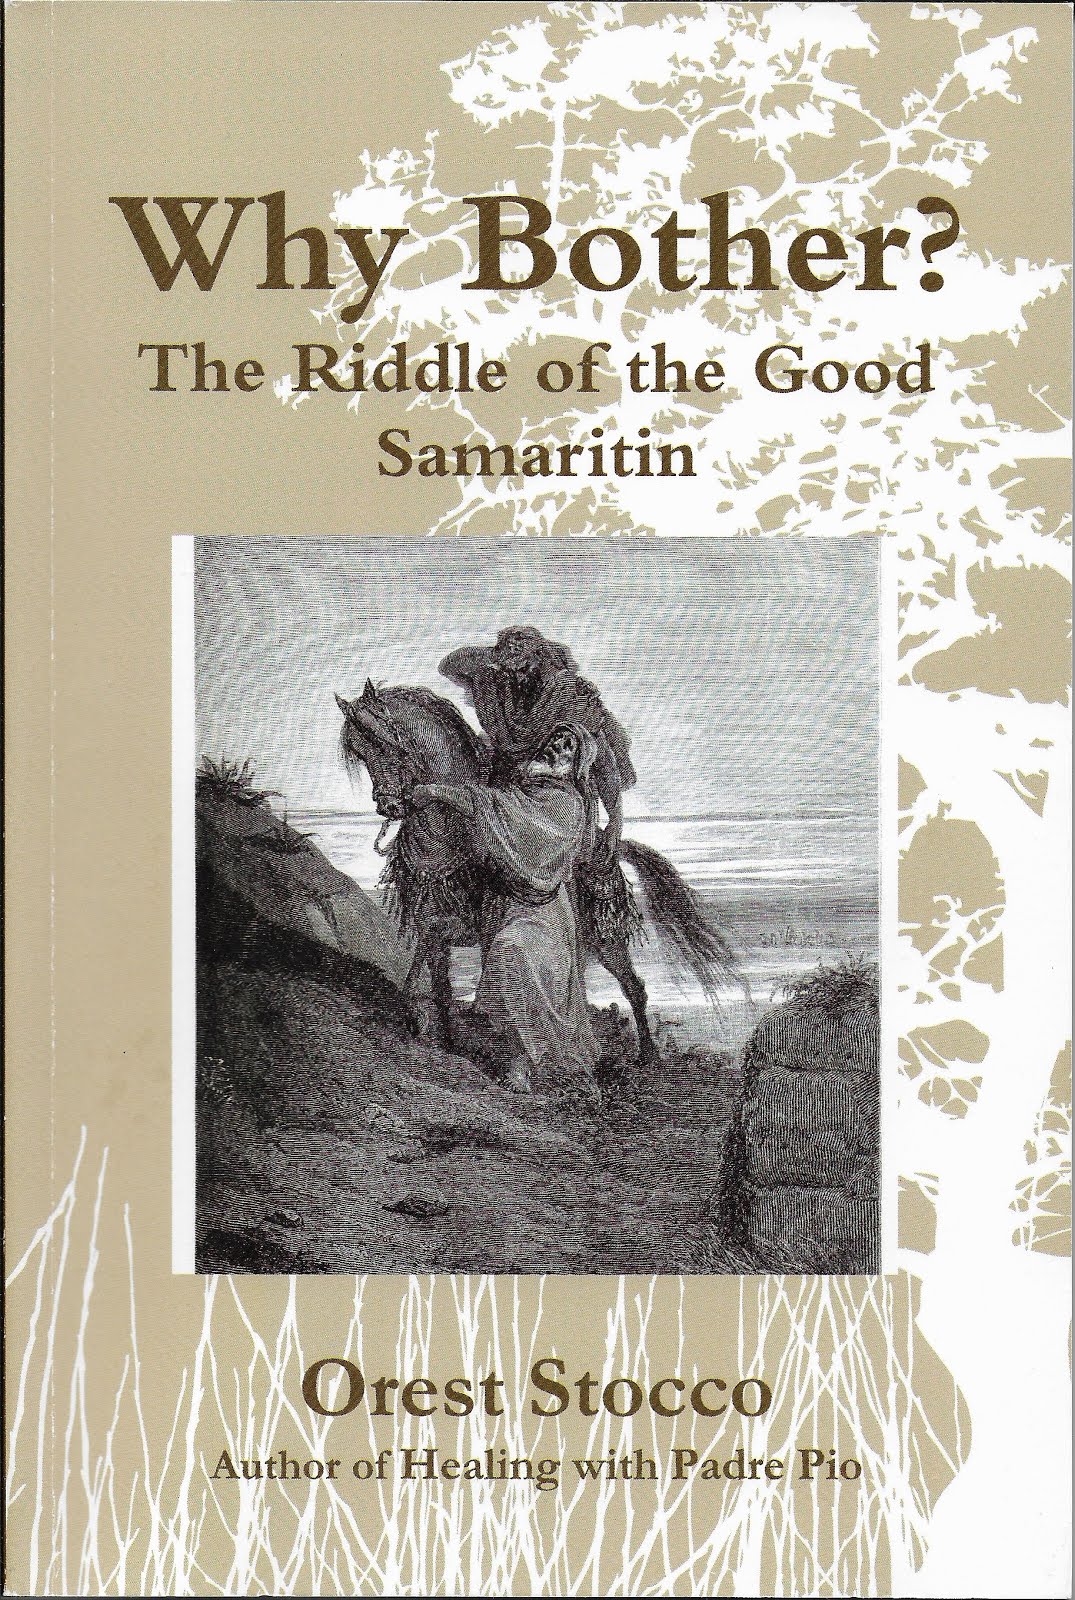 Why Bother? The Riddle of the Good Samaritan